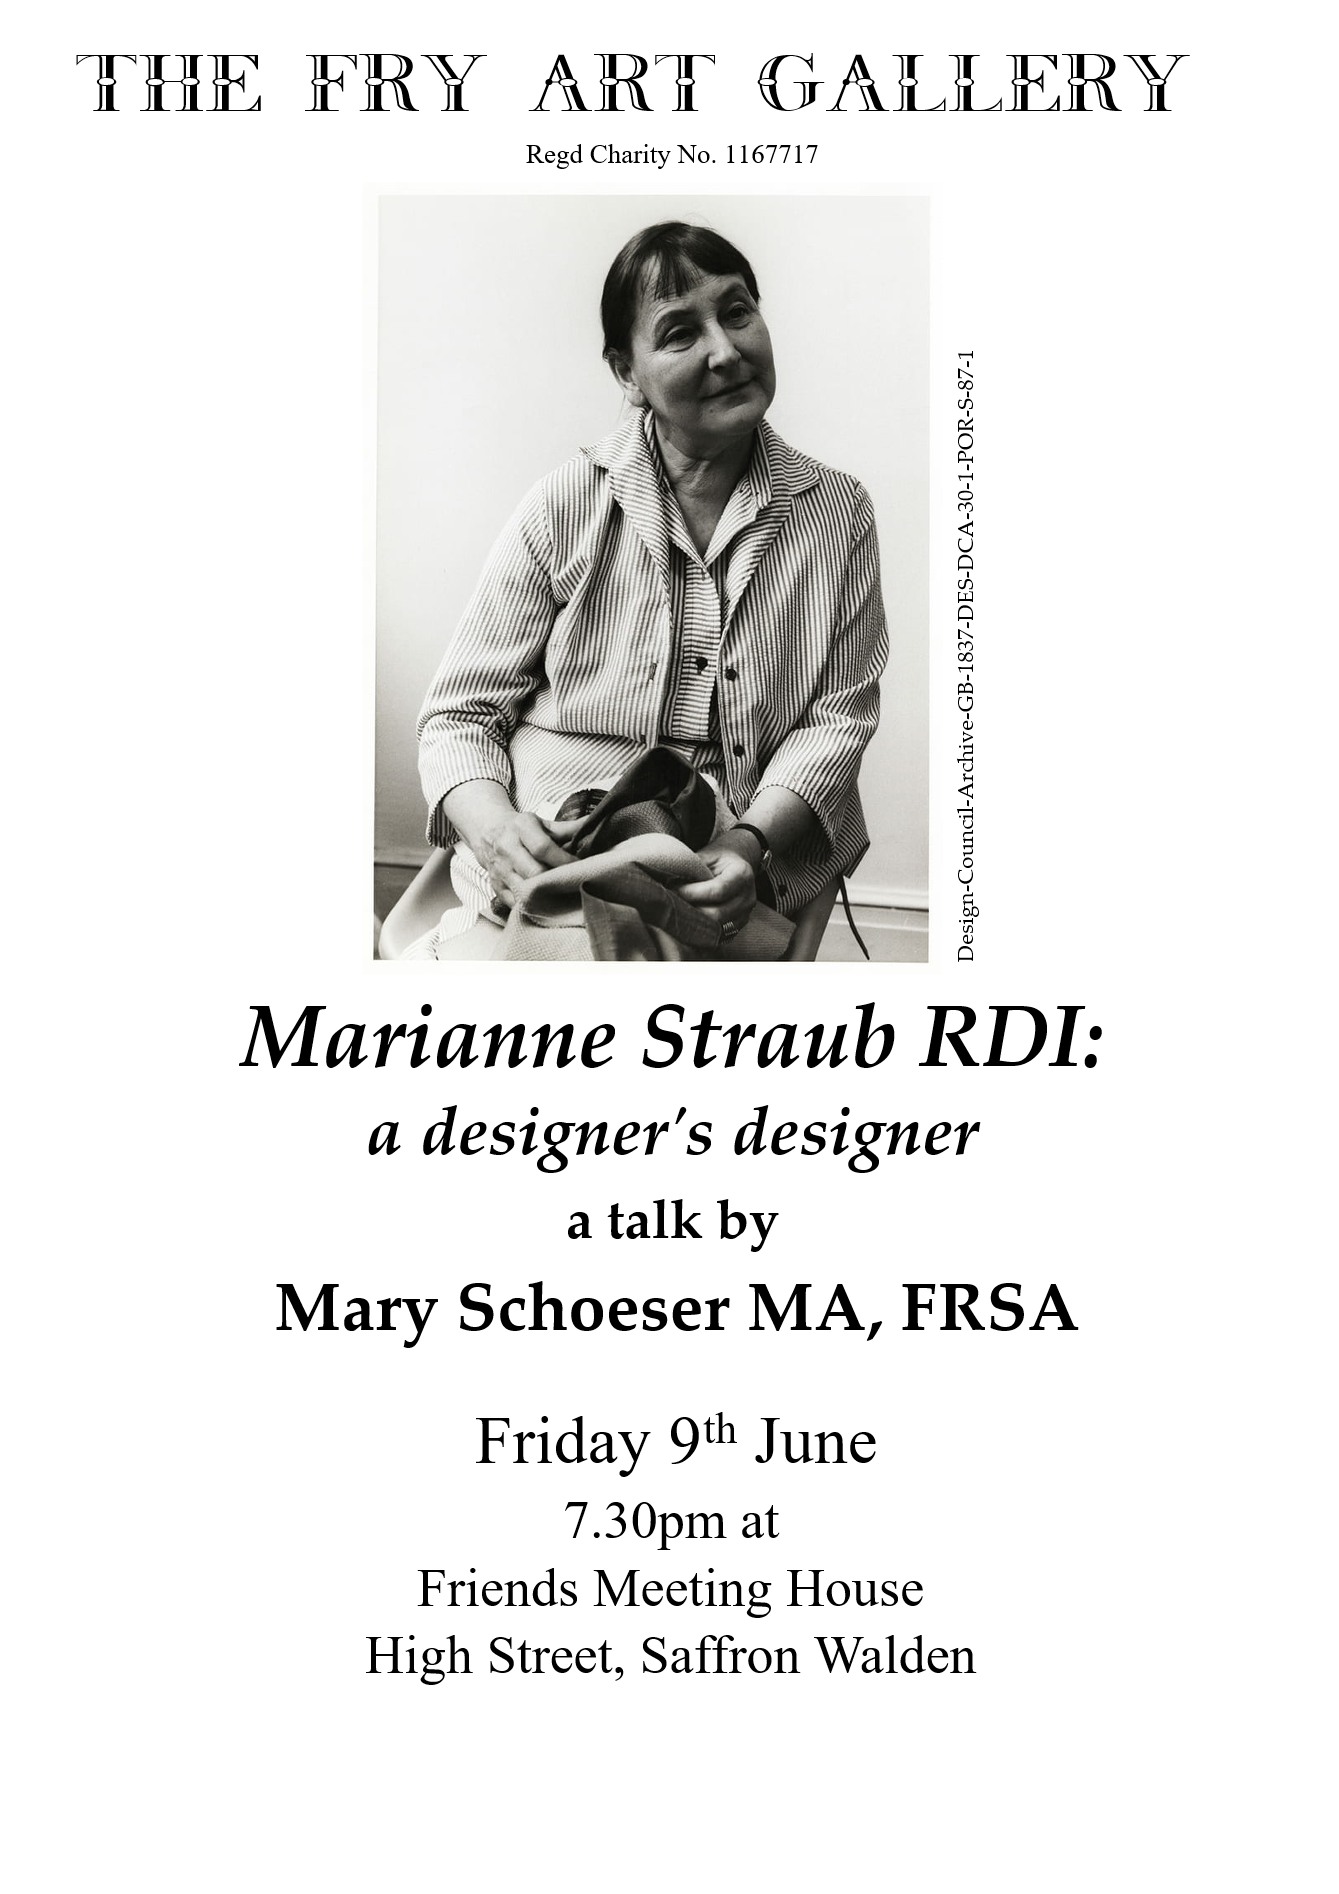 Fry Art Gallery Lectures: Mary Schoeser on Marianne Straub